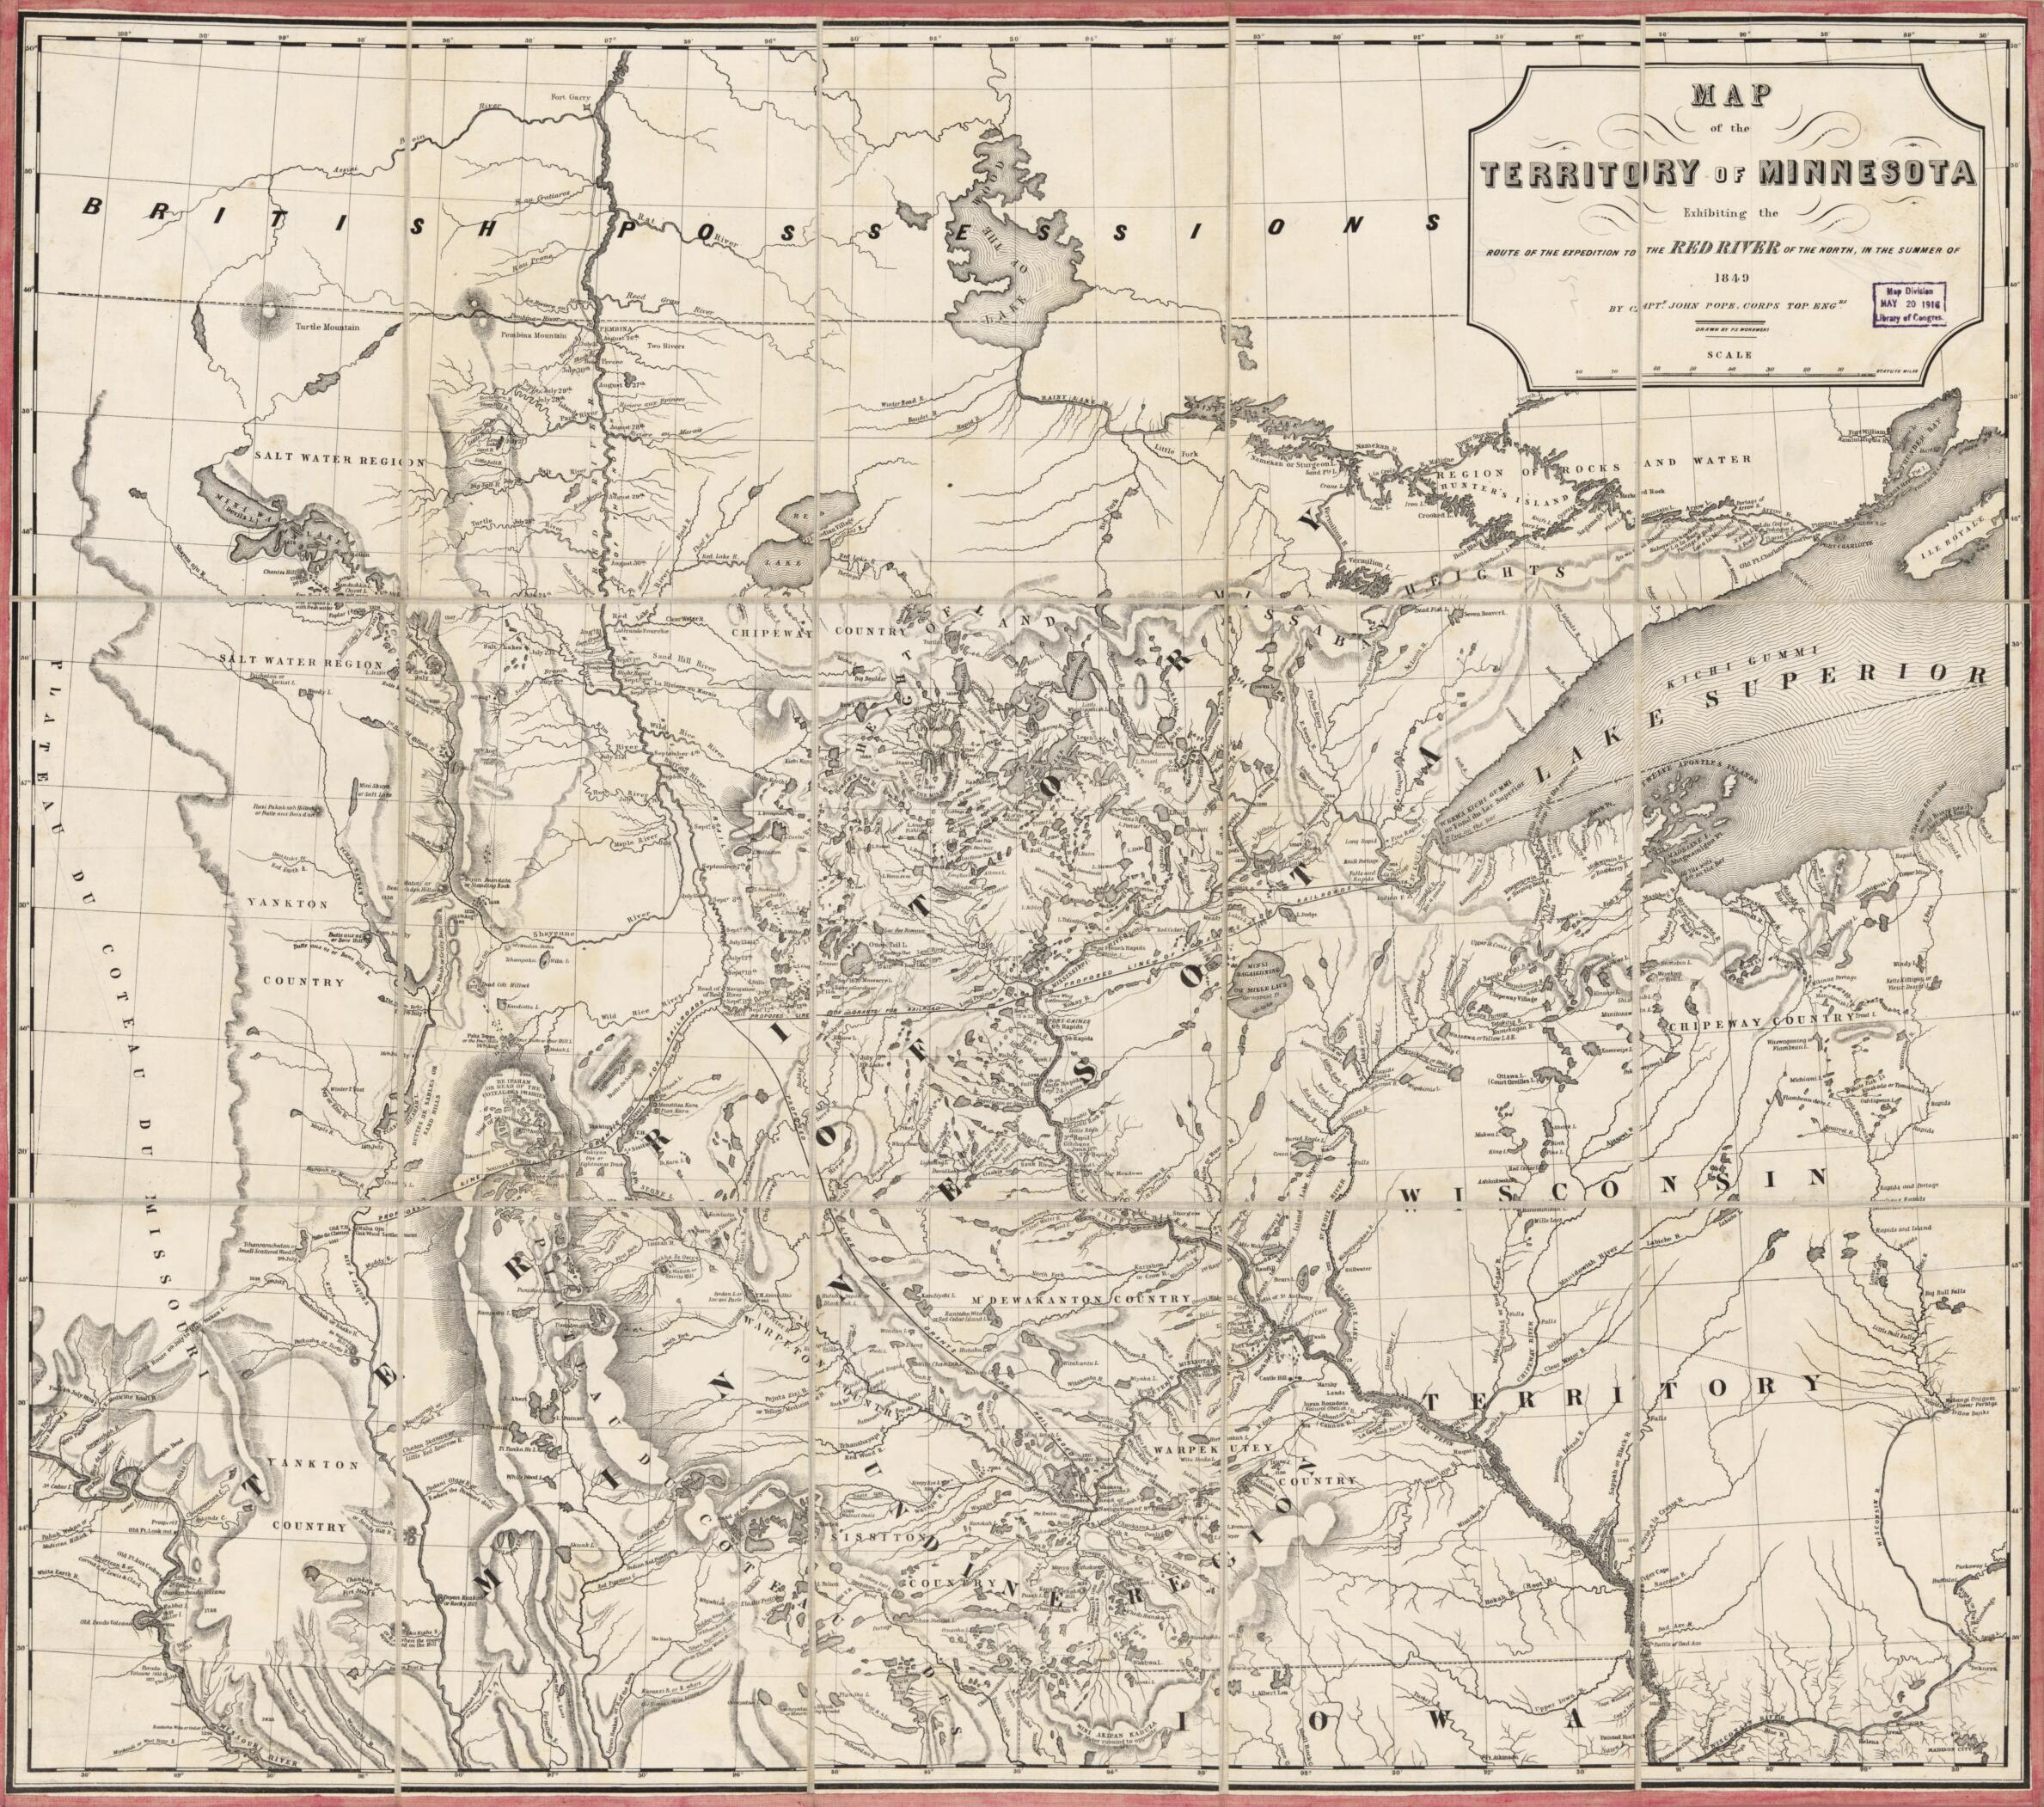 This old map of Map of the Territory of Minnesota Exhibiting the Route of the Expedition to the Red River of the North, In the Summer of from 1849 was created by Millard Fillmore, P. S. Morawski, John Pope in 1849